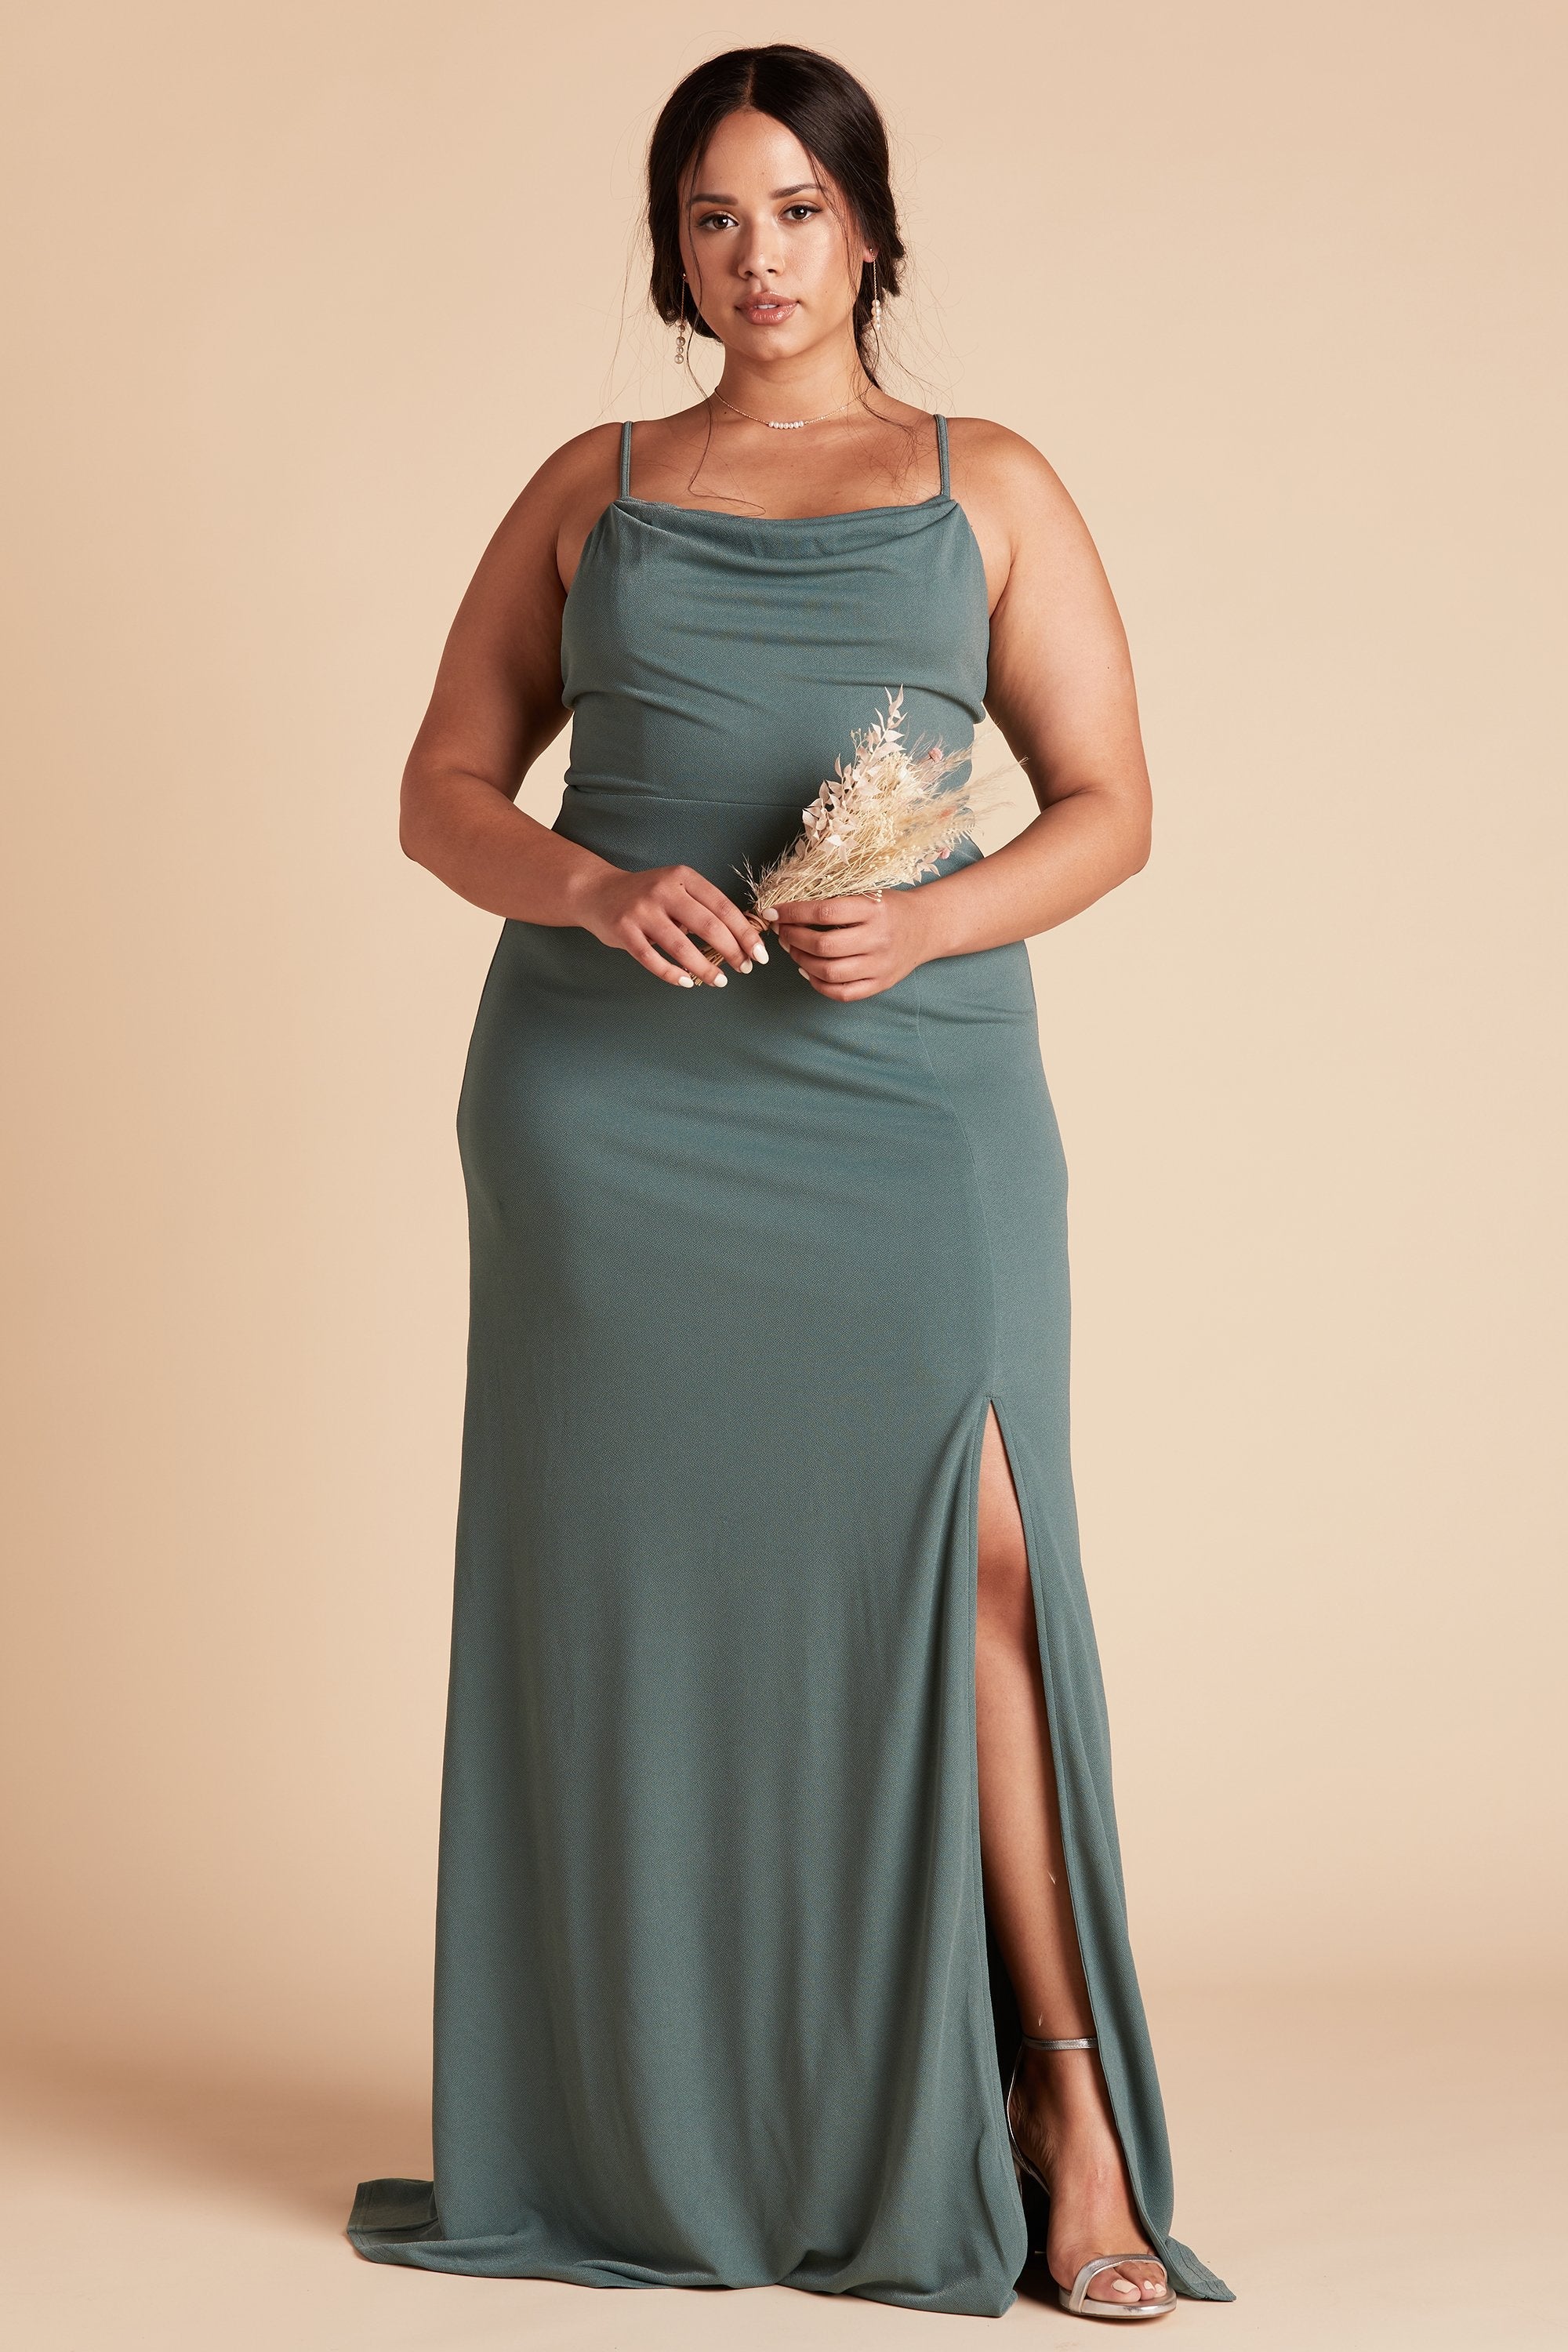 Front view of the floor-length Ash Plus Size Bridesmaid Dress in sea glass crepe by Birdy Grey with a slightly draped cowl neck front. The flowing skirt features a slit over the front left leg.